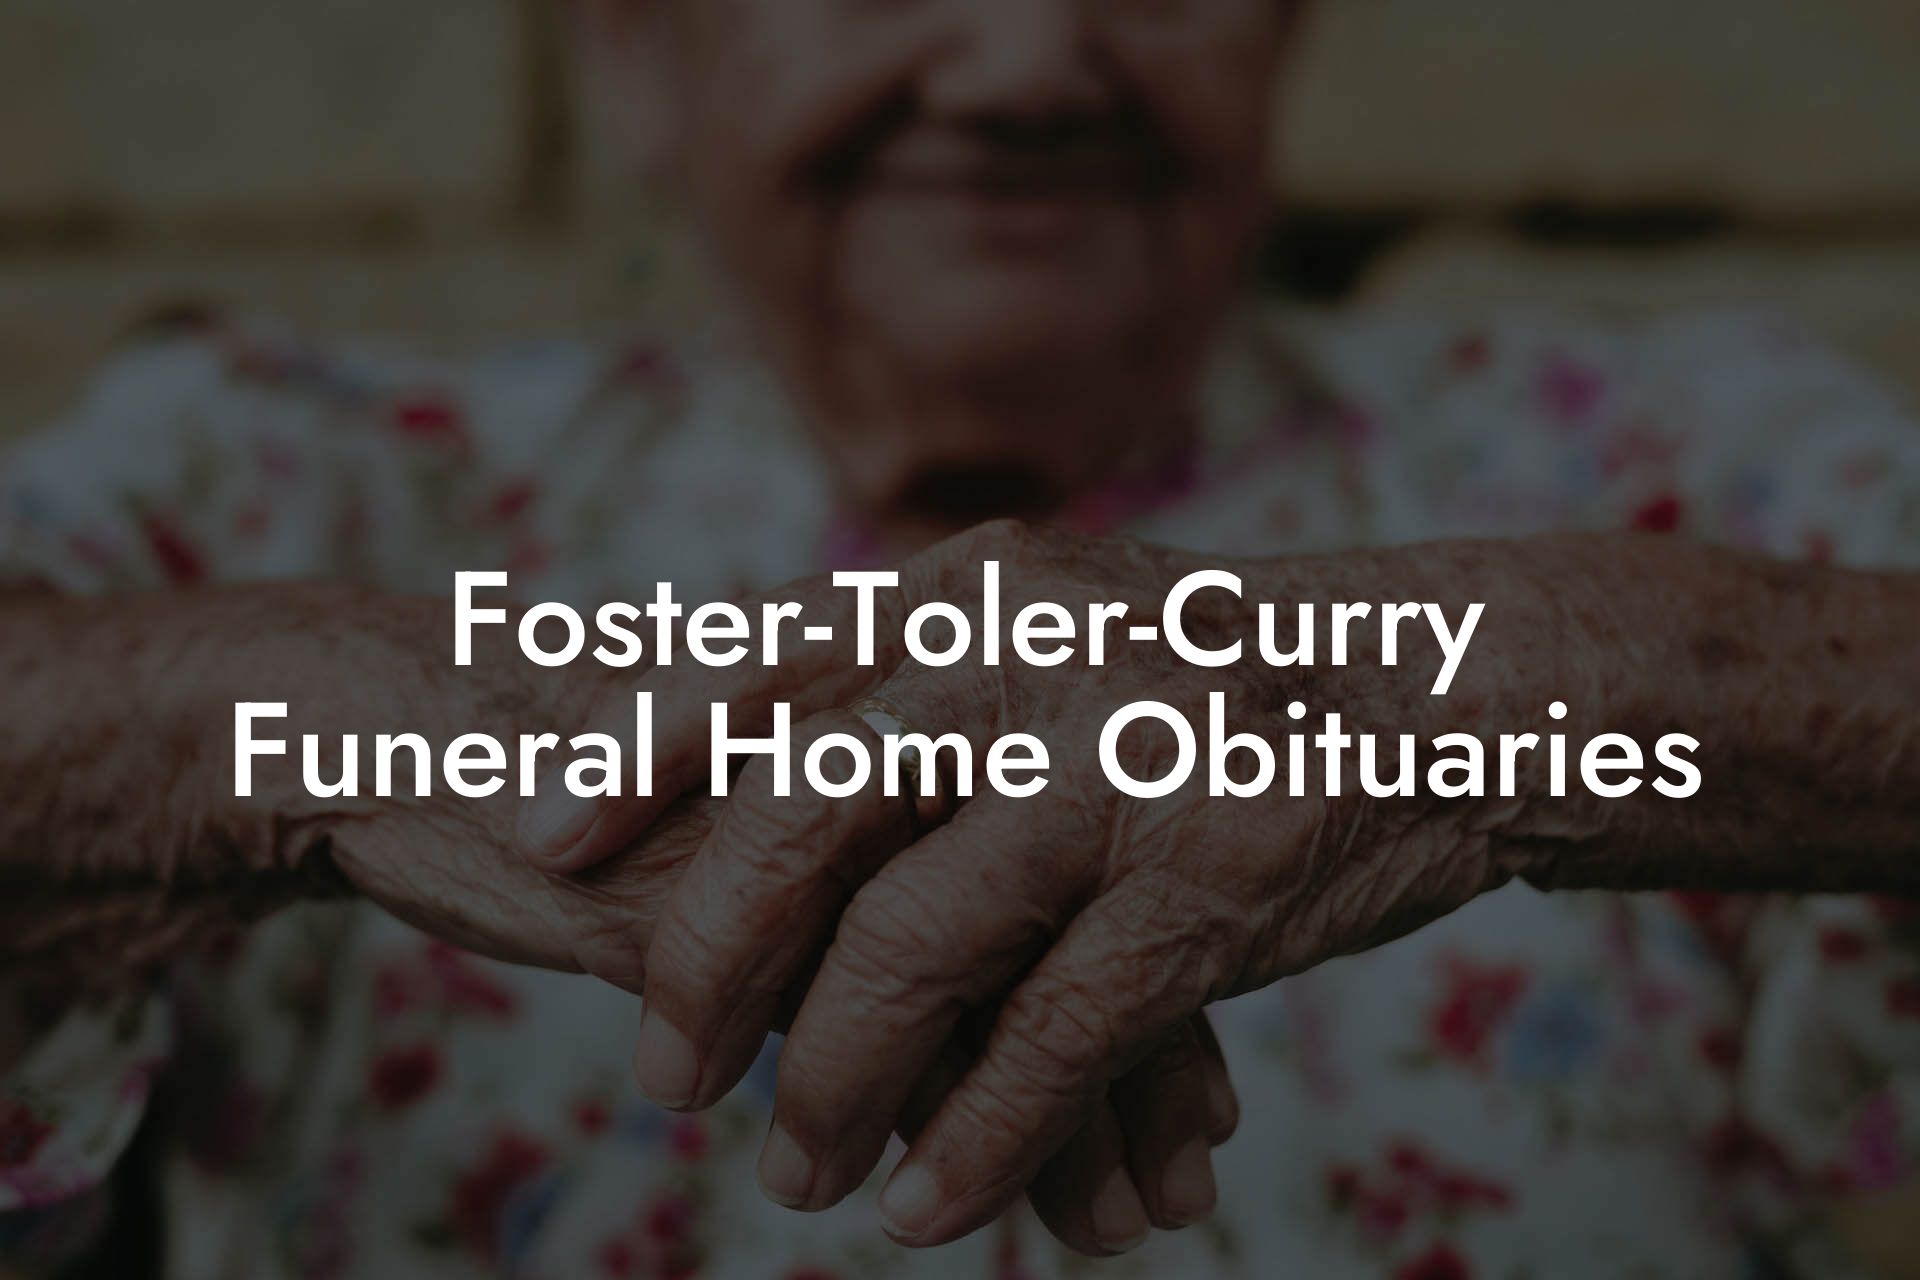 Foster-Toler-Curry Funeral Home Obituaries